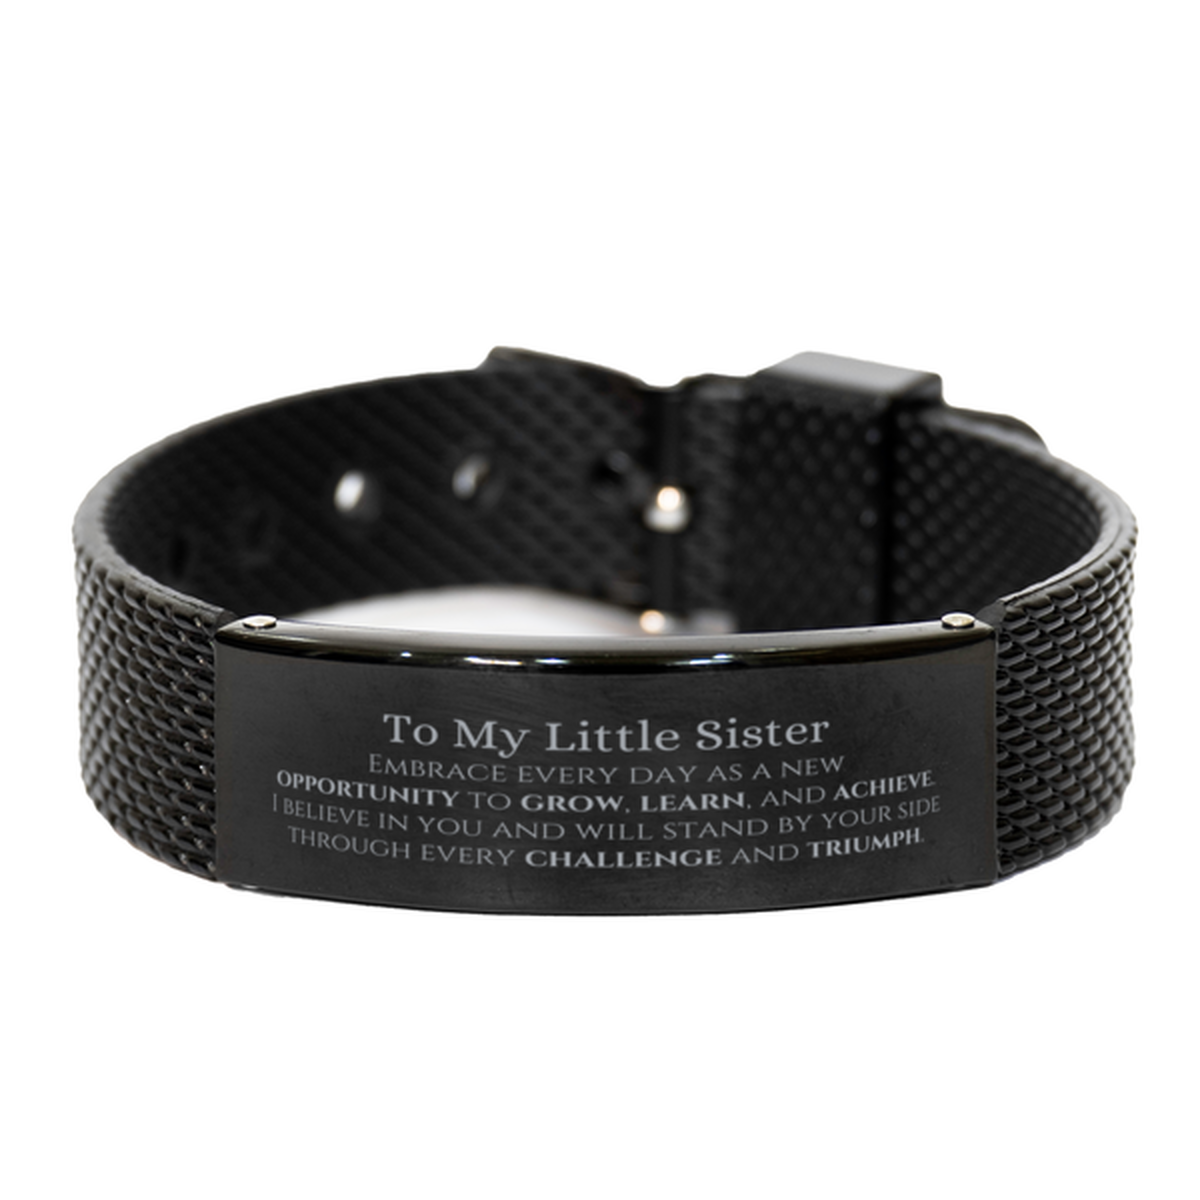 To My Little Sister Gifts, I believe in you and will stand by your side, Inspirational Black Shark Mesh Bracelet For Little Sister, Birthday Christmas Motivational Little Sister Gifts